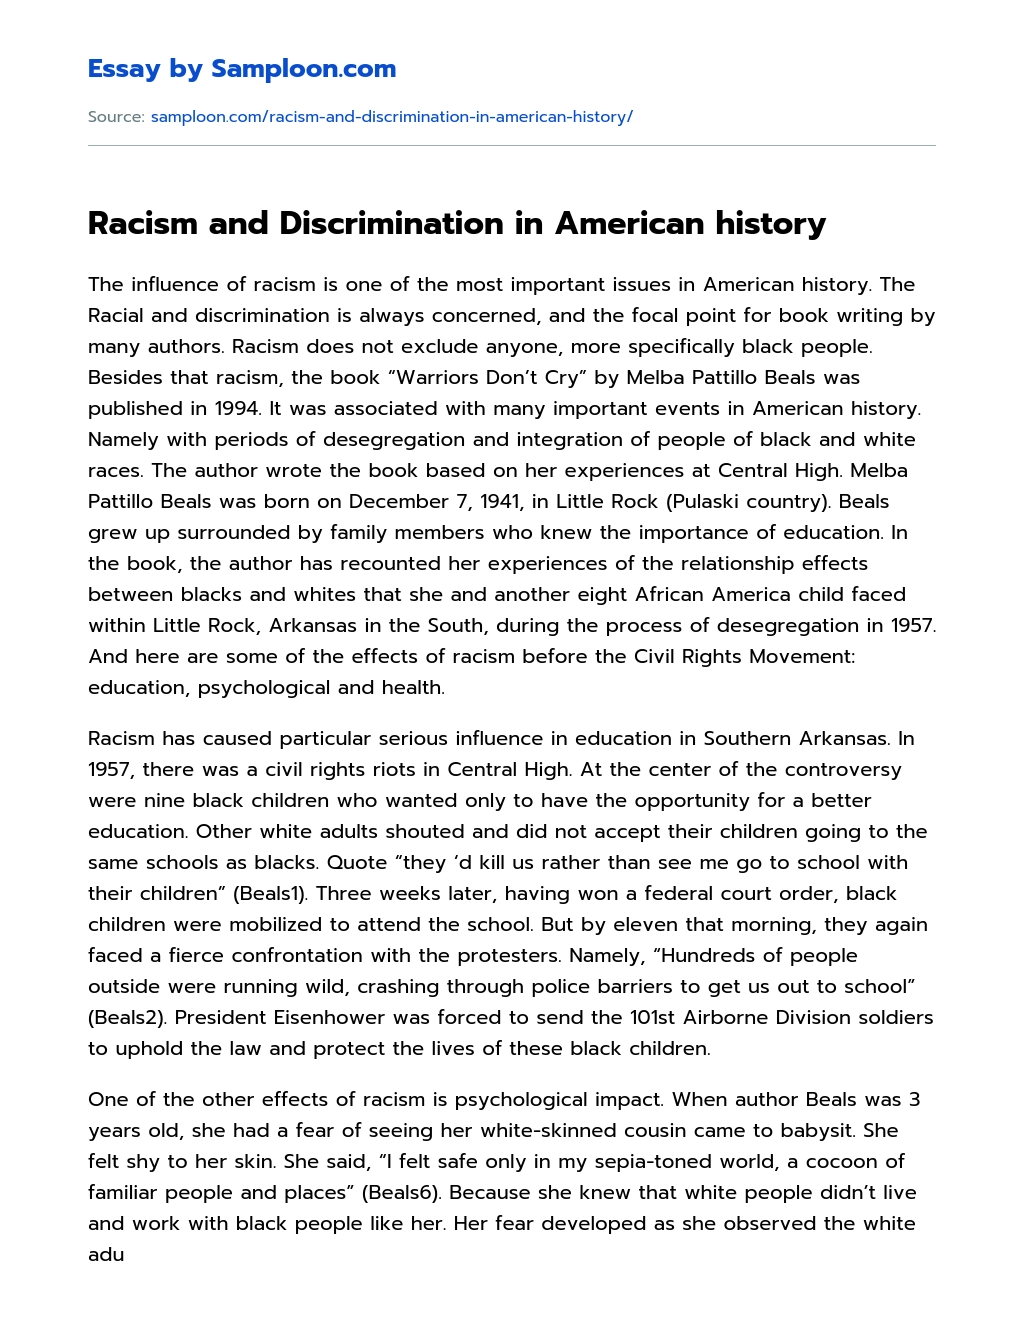 Racism and Discrimination in American history essay